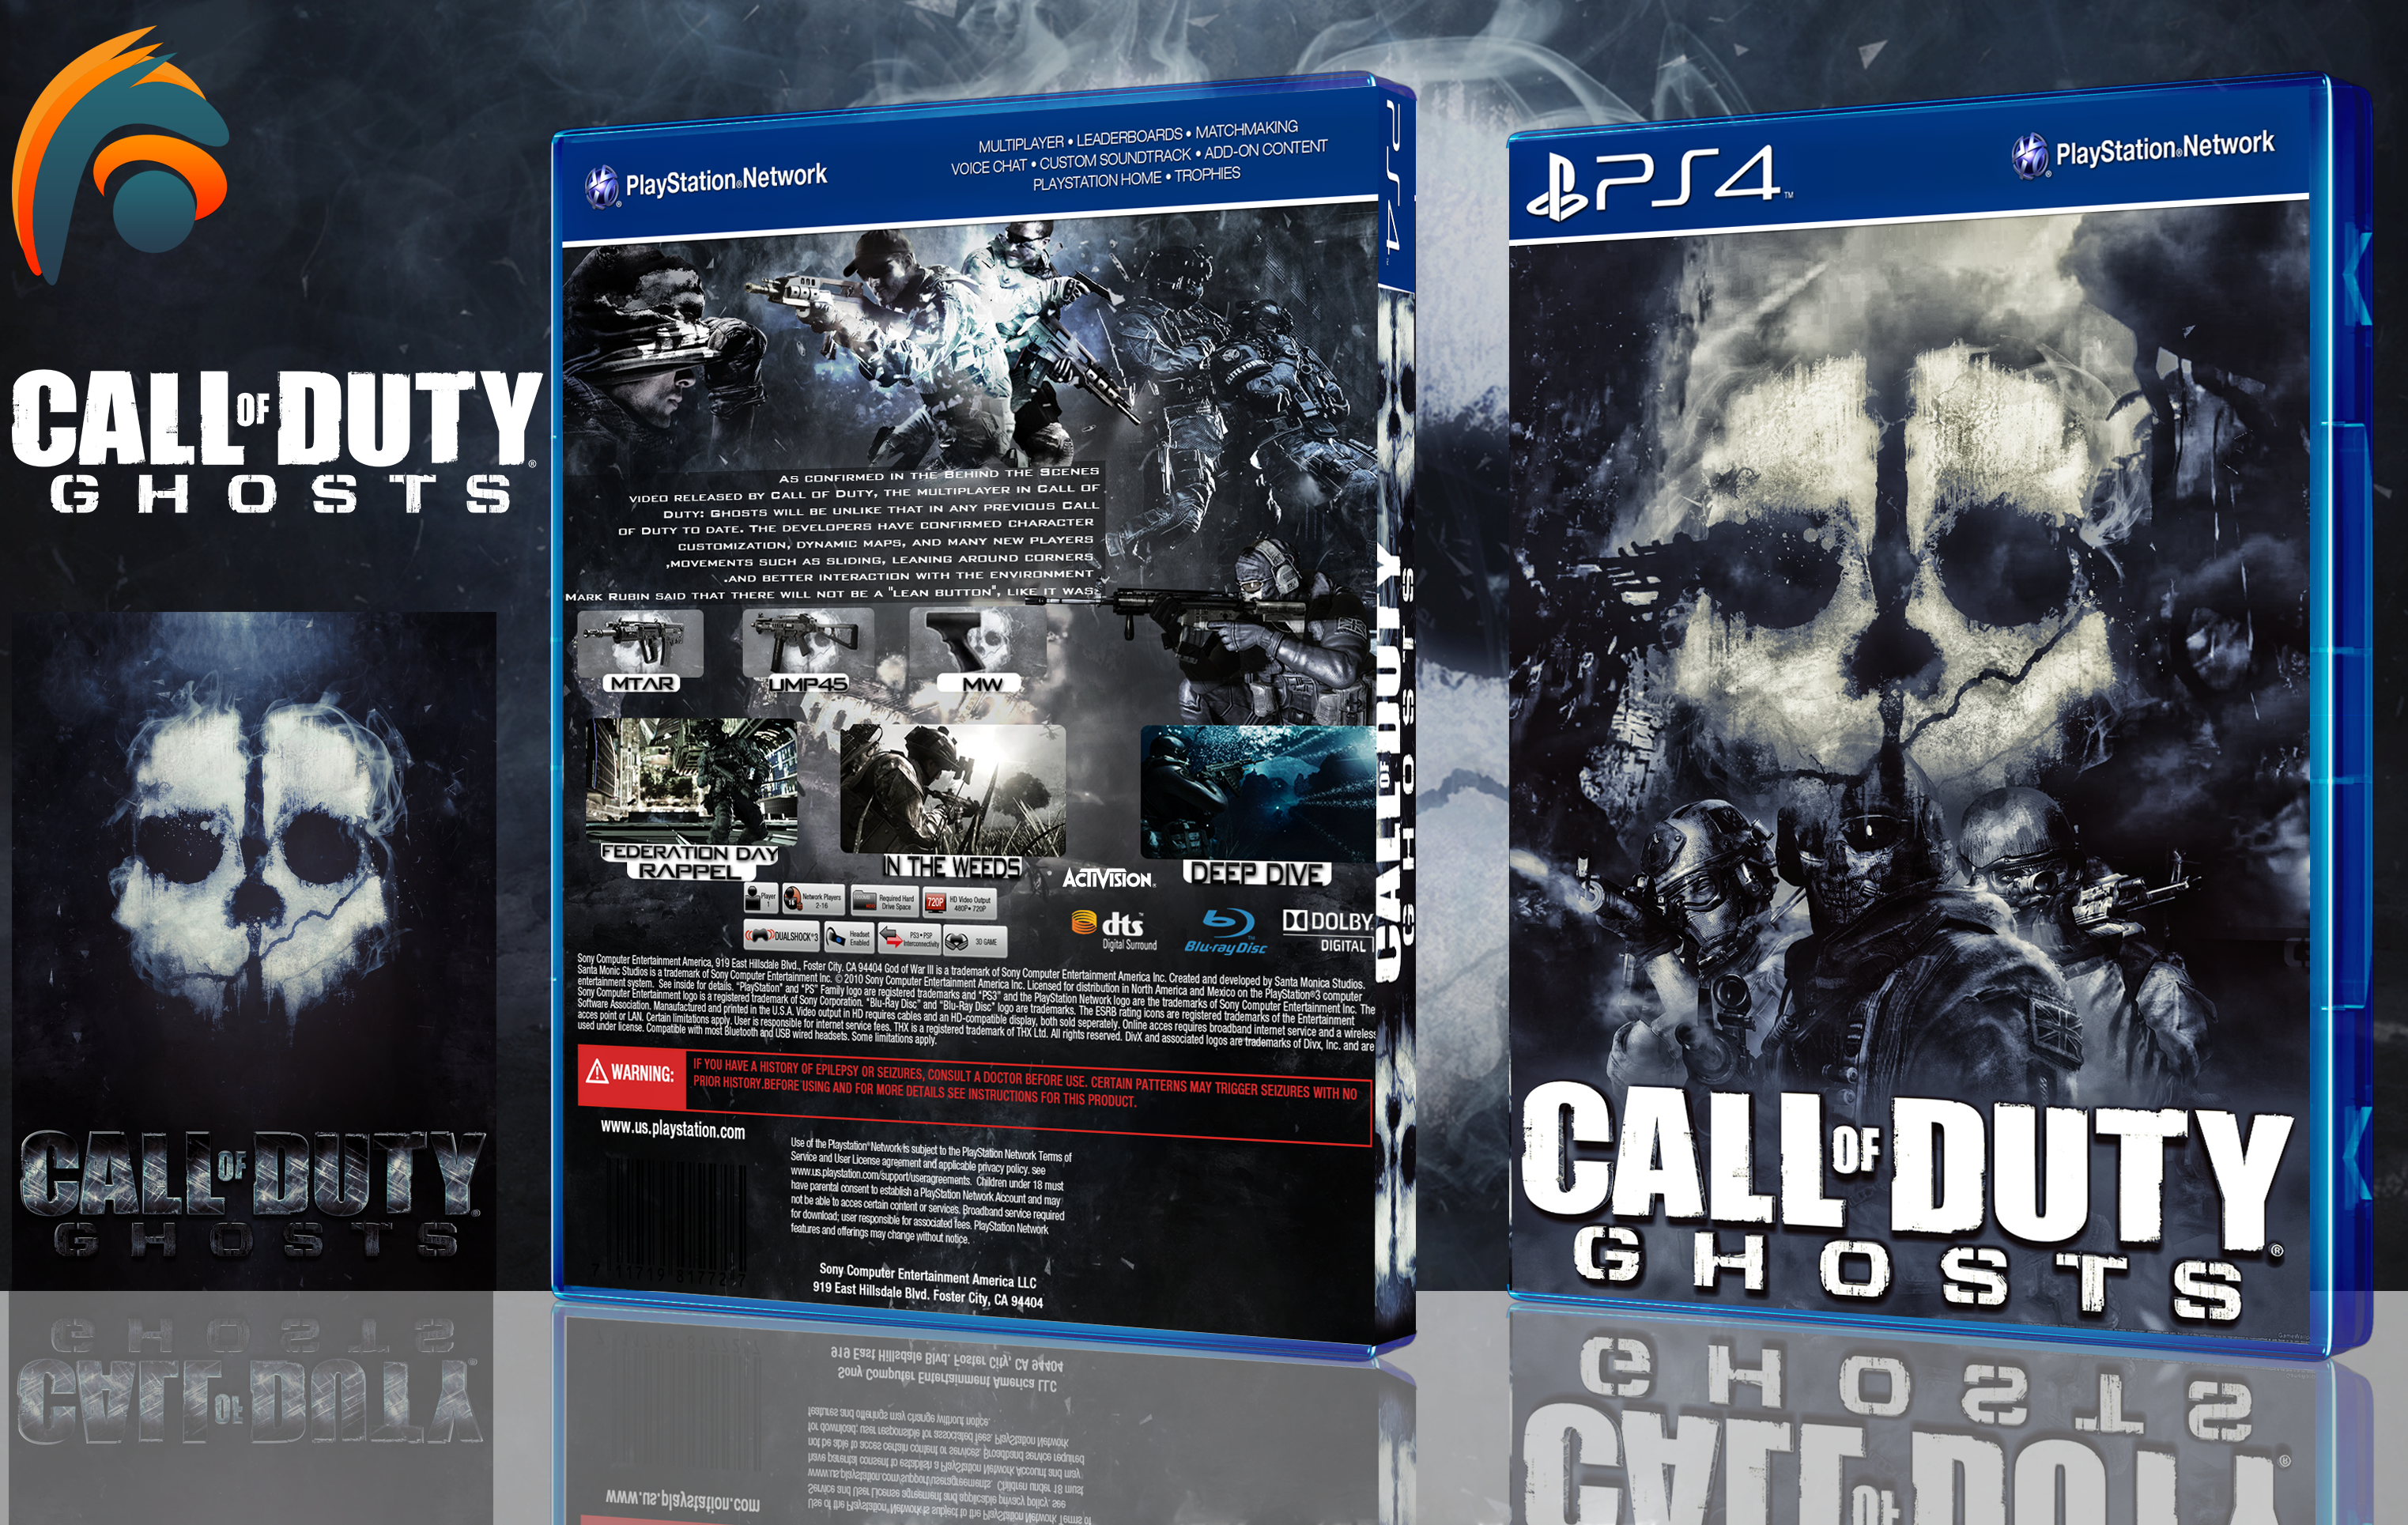 call of duty ghosts box cover ps4 by hohogfx on DeviantArt